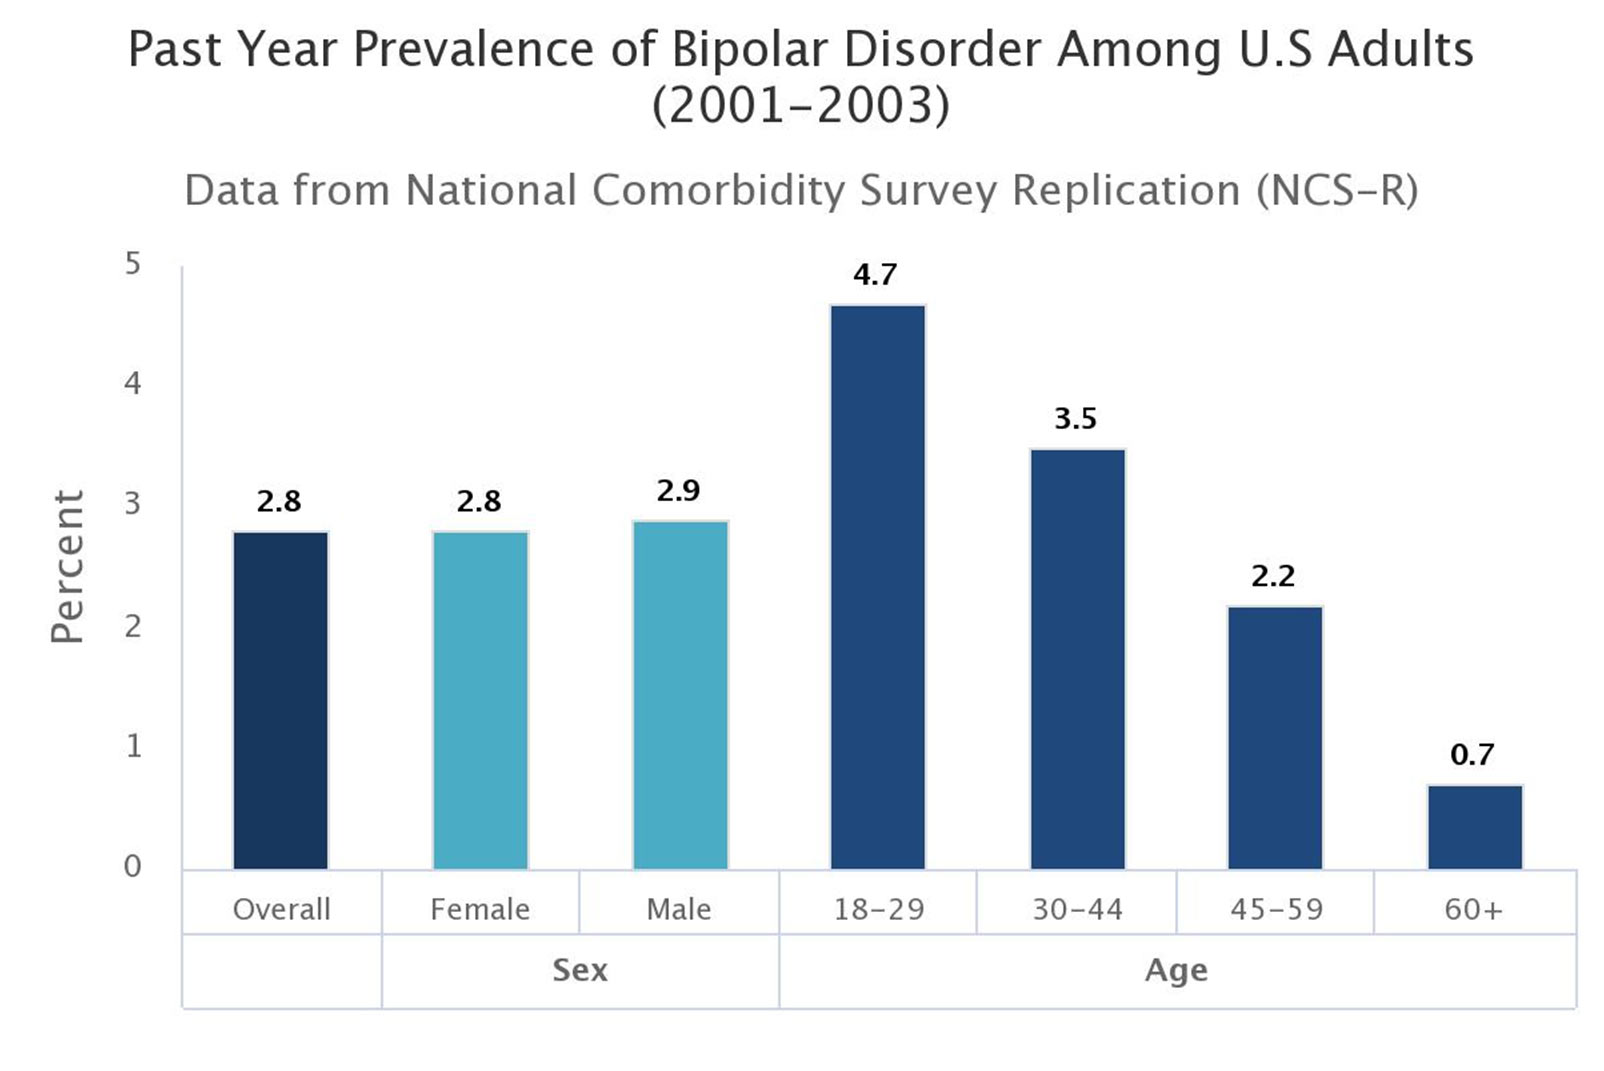 Past Year Prevalence of Bipolar disorder adults (2001-2003)